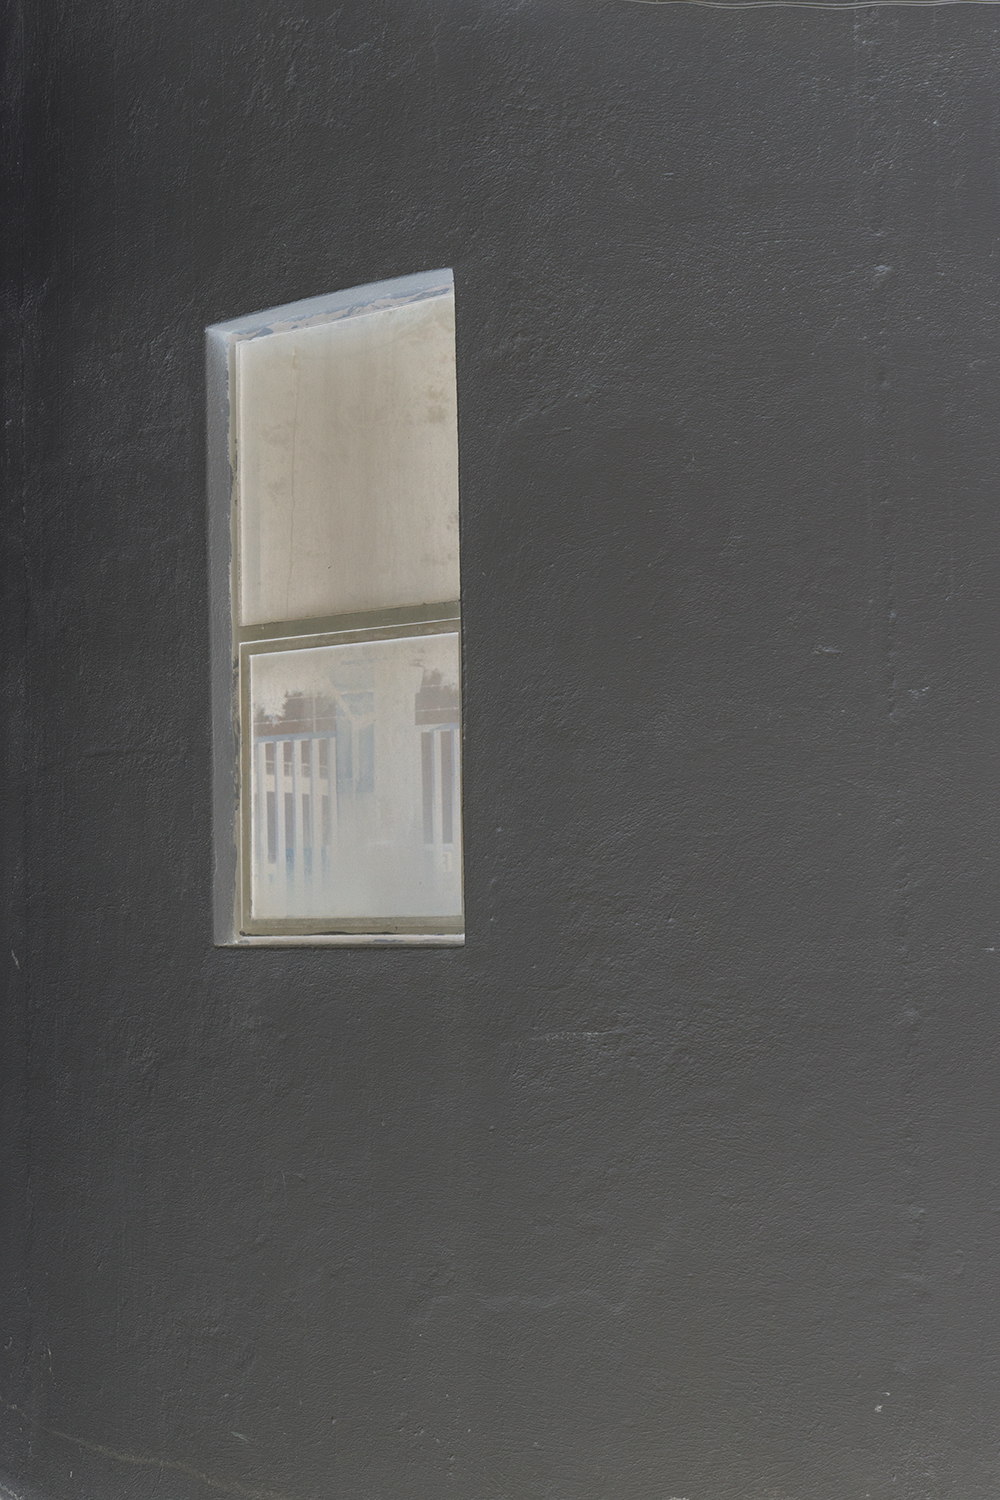 carina martins, a passing view - window in a grey wall